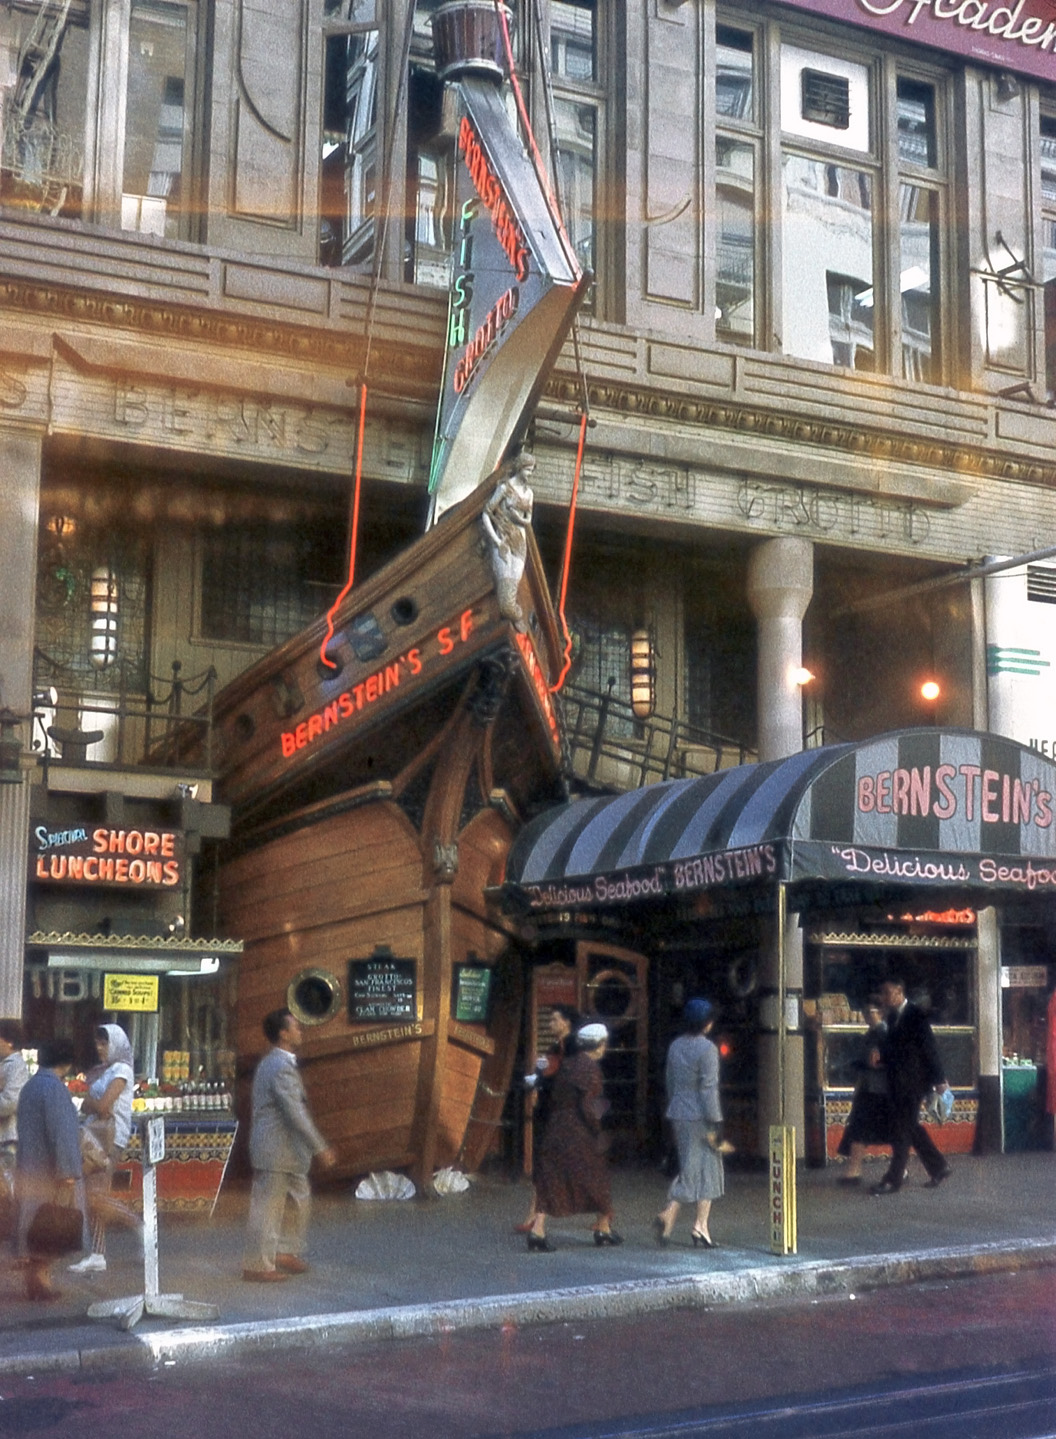 Bernstein's Fish Grotto restaurant on Powell Street in San Francisco in 1957. I like the building facade; when someone said "take a bow," Bernstein's took it literally! Color slide by my father. View full size.